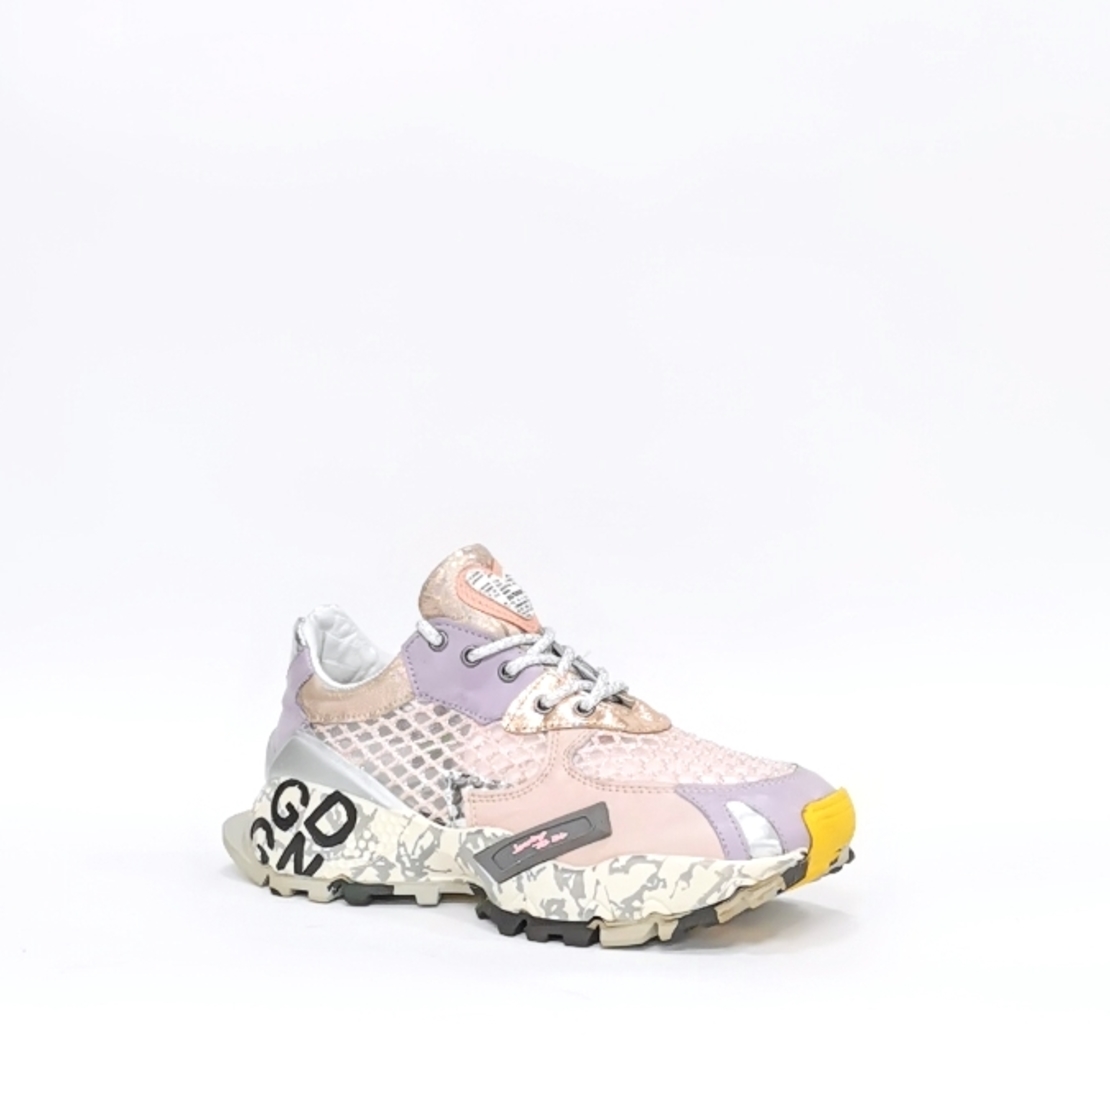 Women's sneakers made of natural leather with anatomical insole in pink + purple color/73054